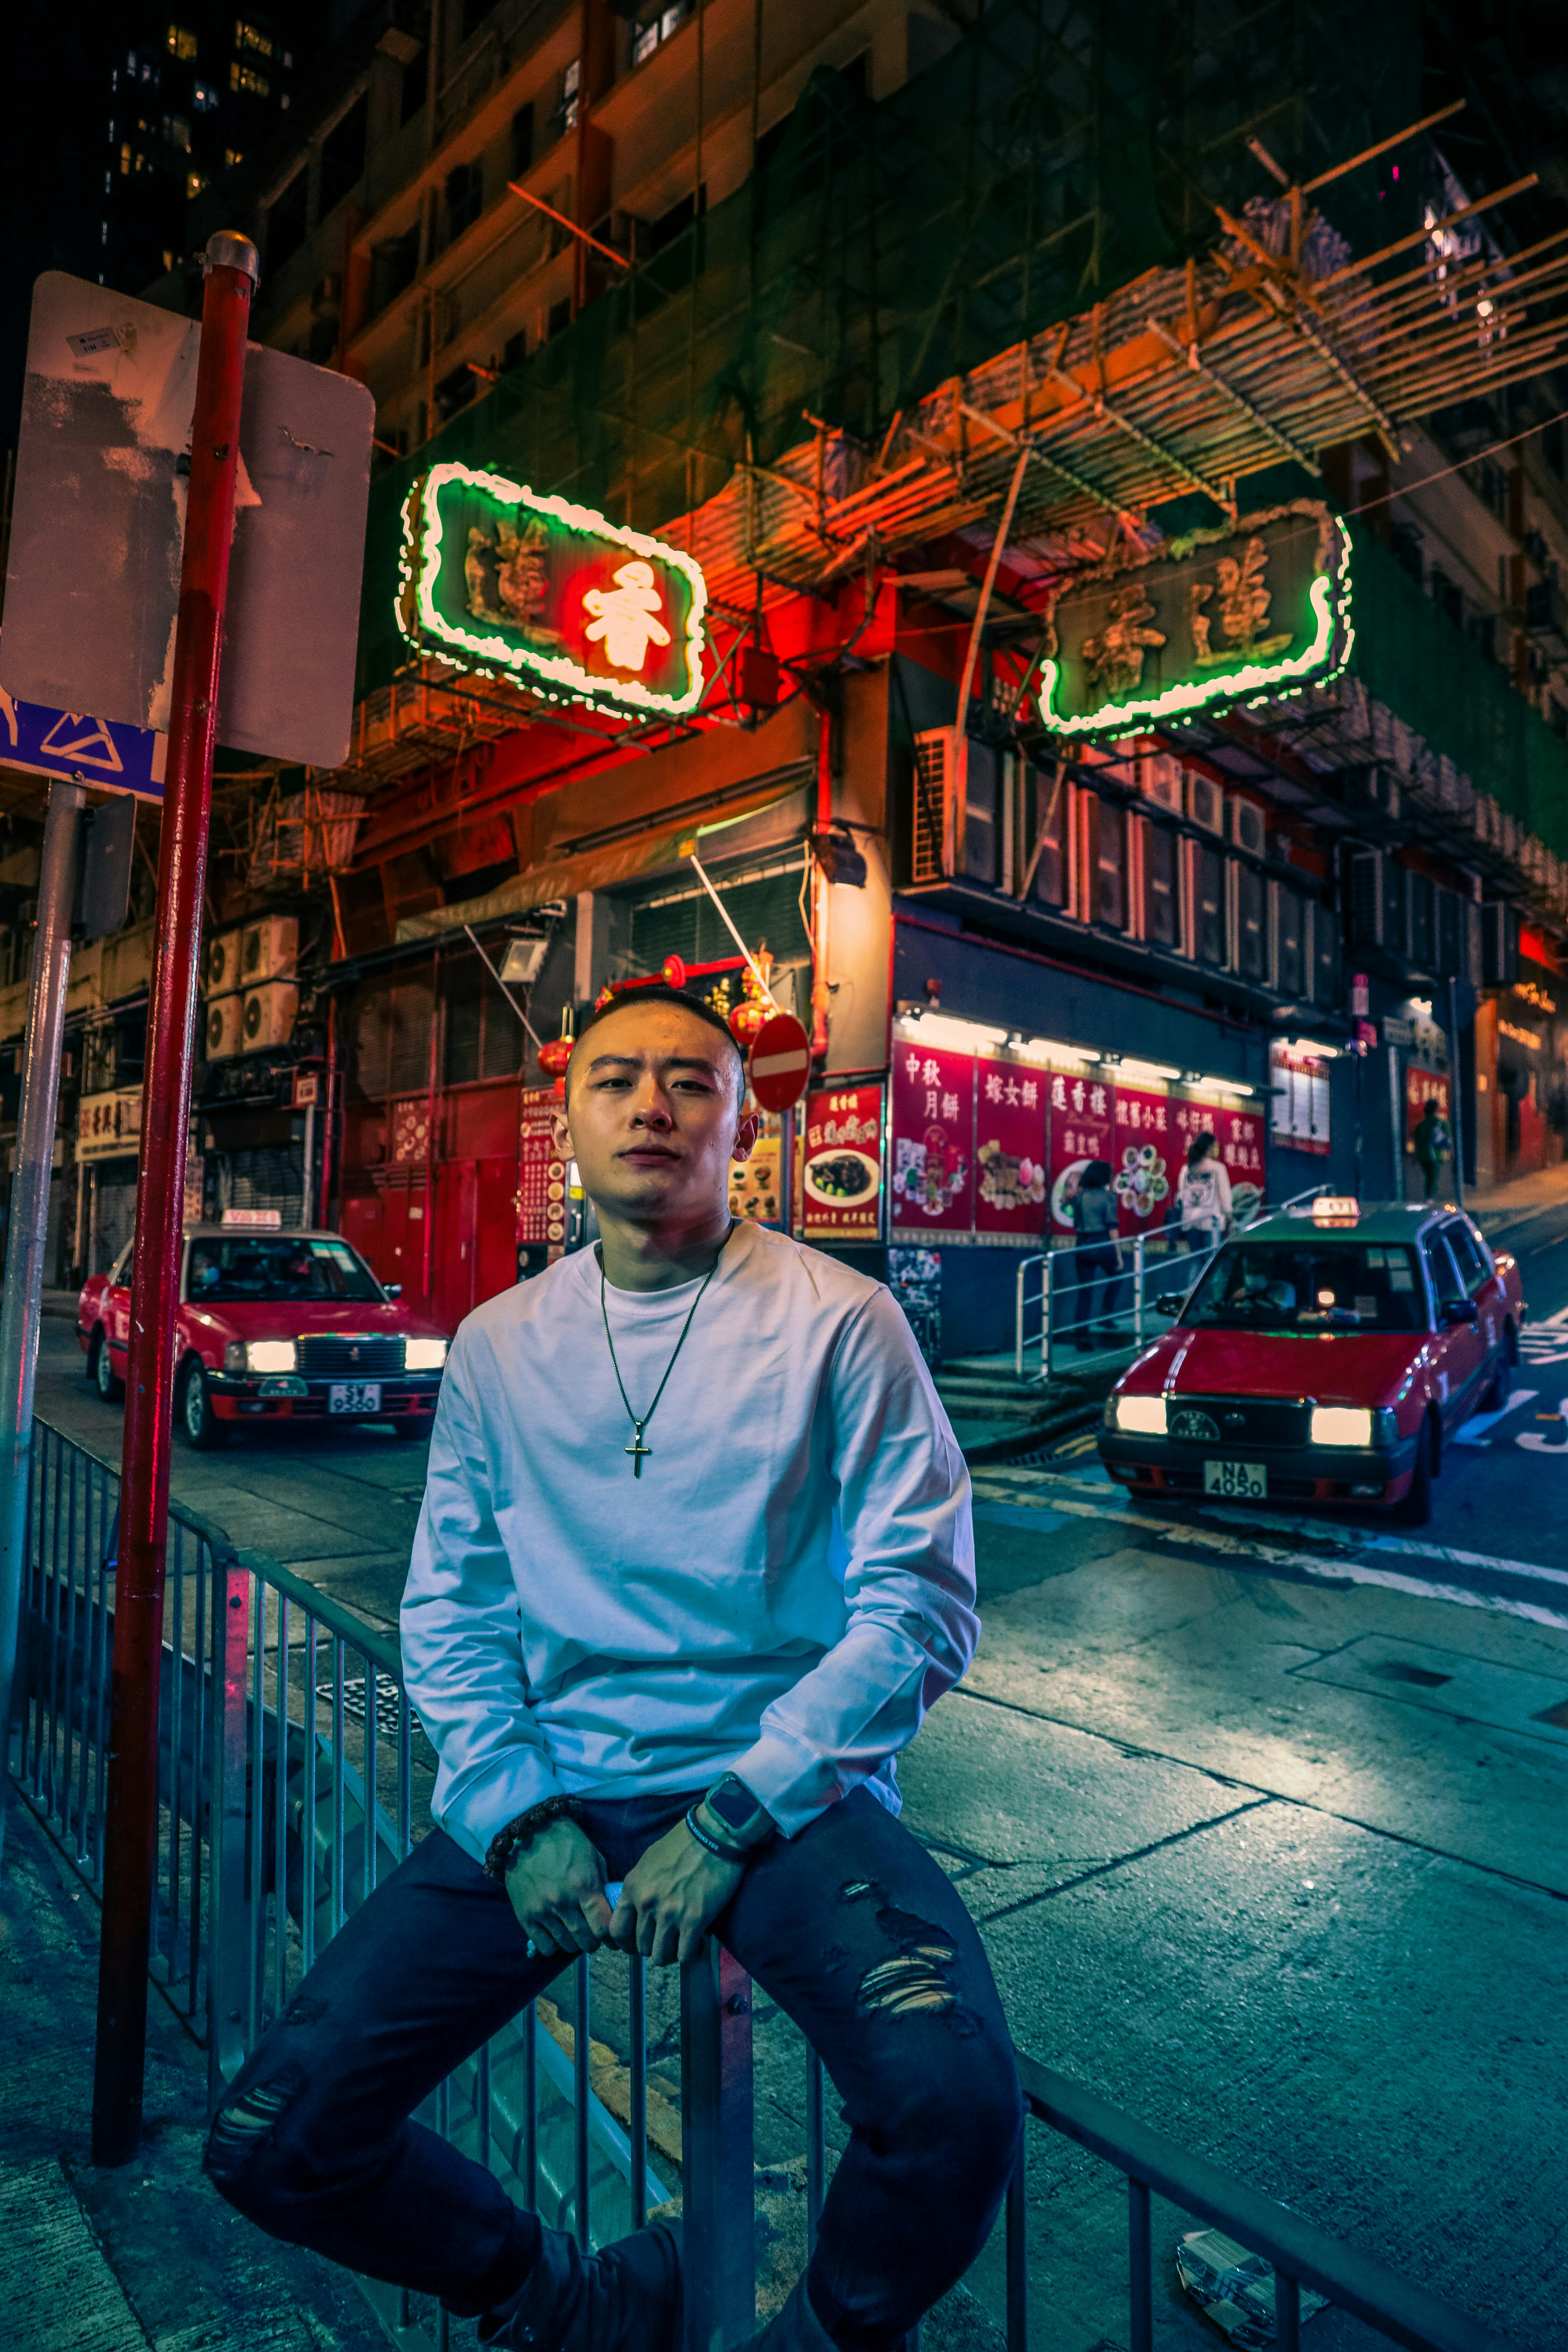 man in white sweater sitting on red metal fence during night time